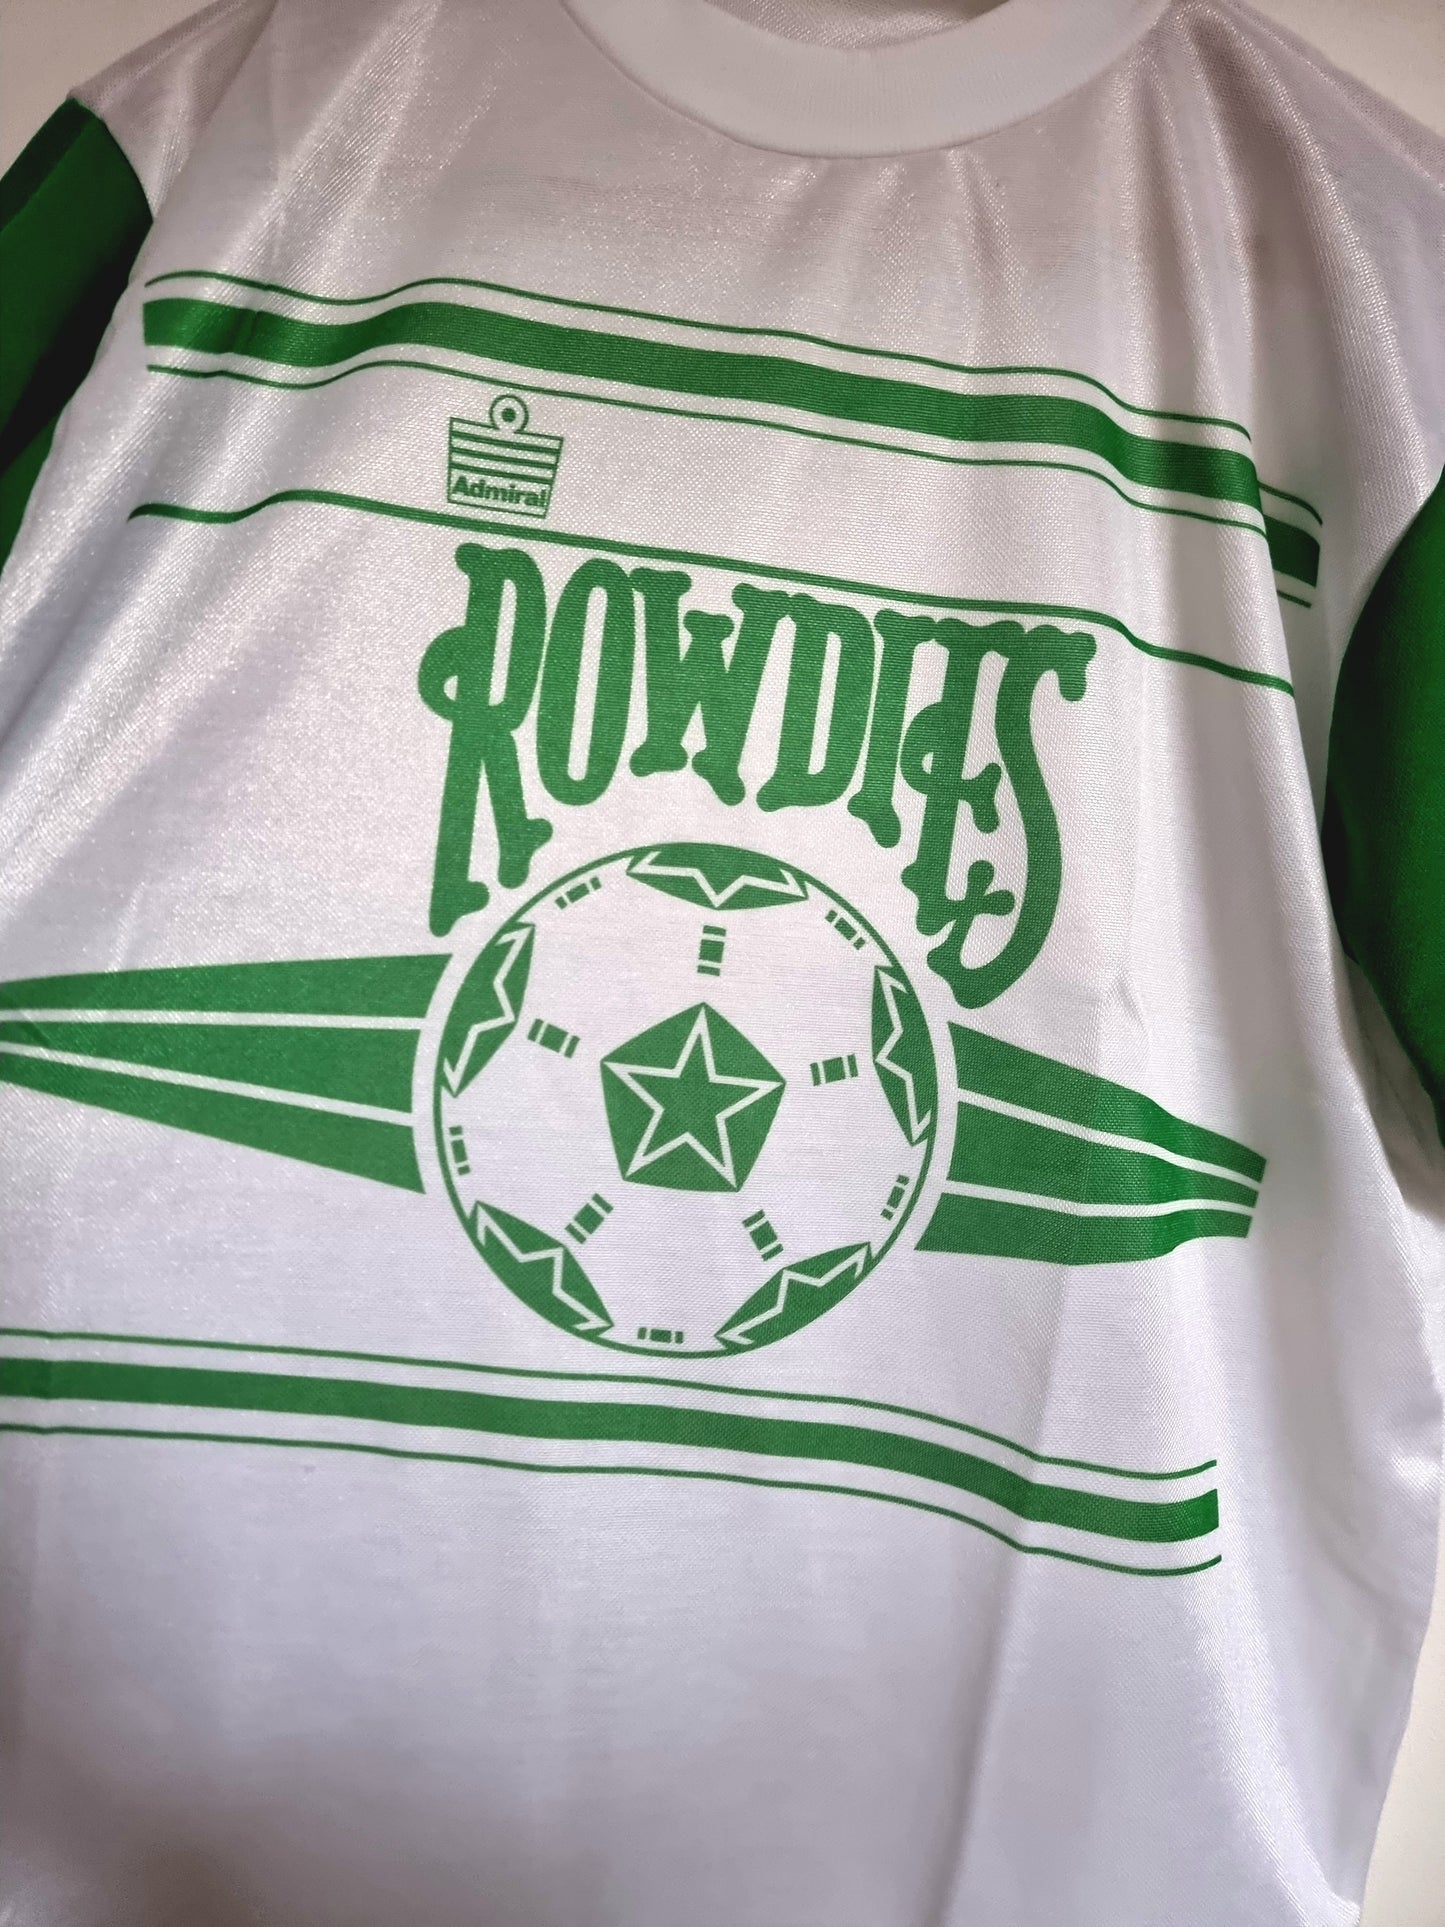 Admiral Tampa Bay Rowdies 80s Leisure T- Shirt Large – Granny's